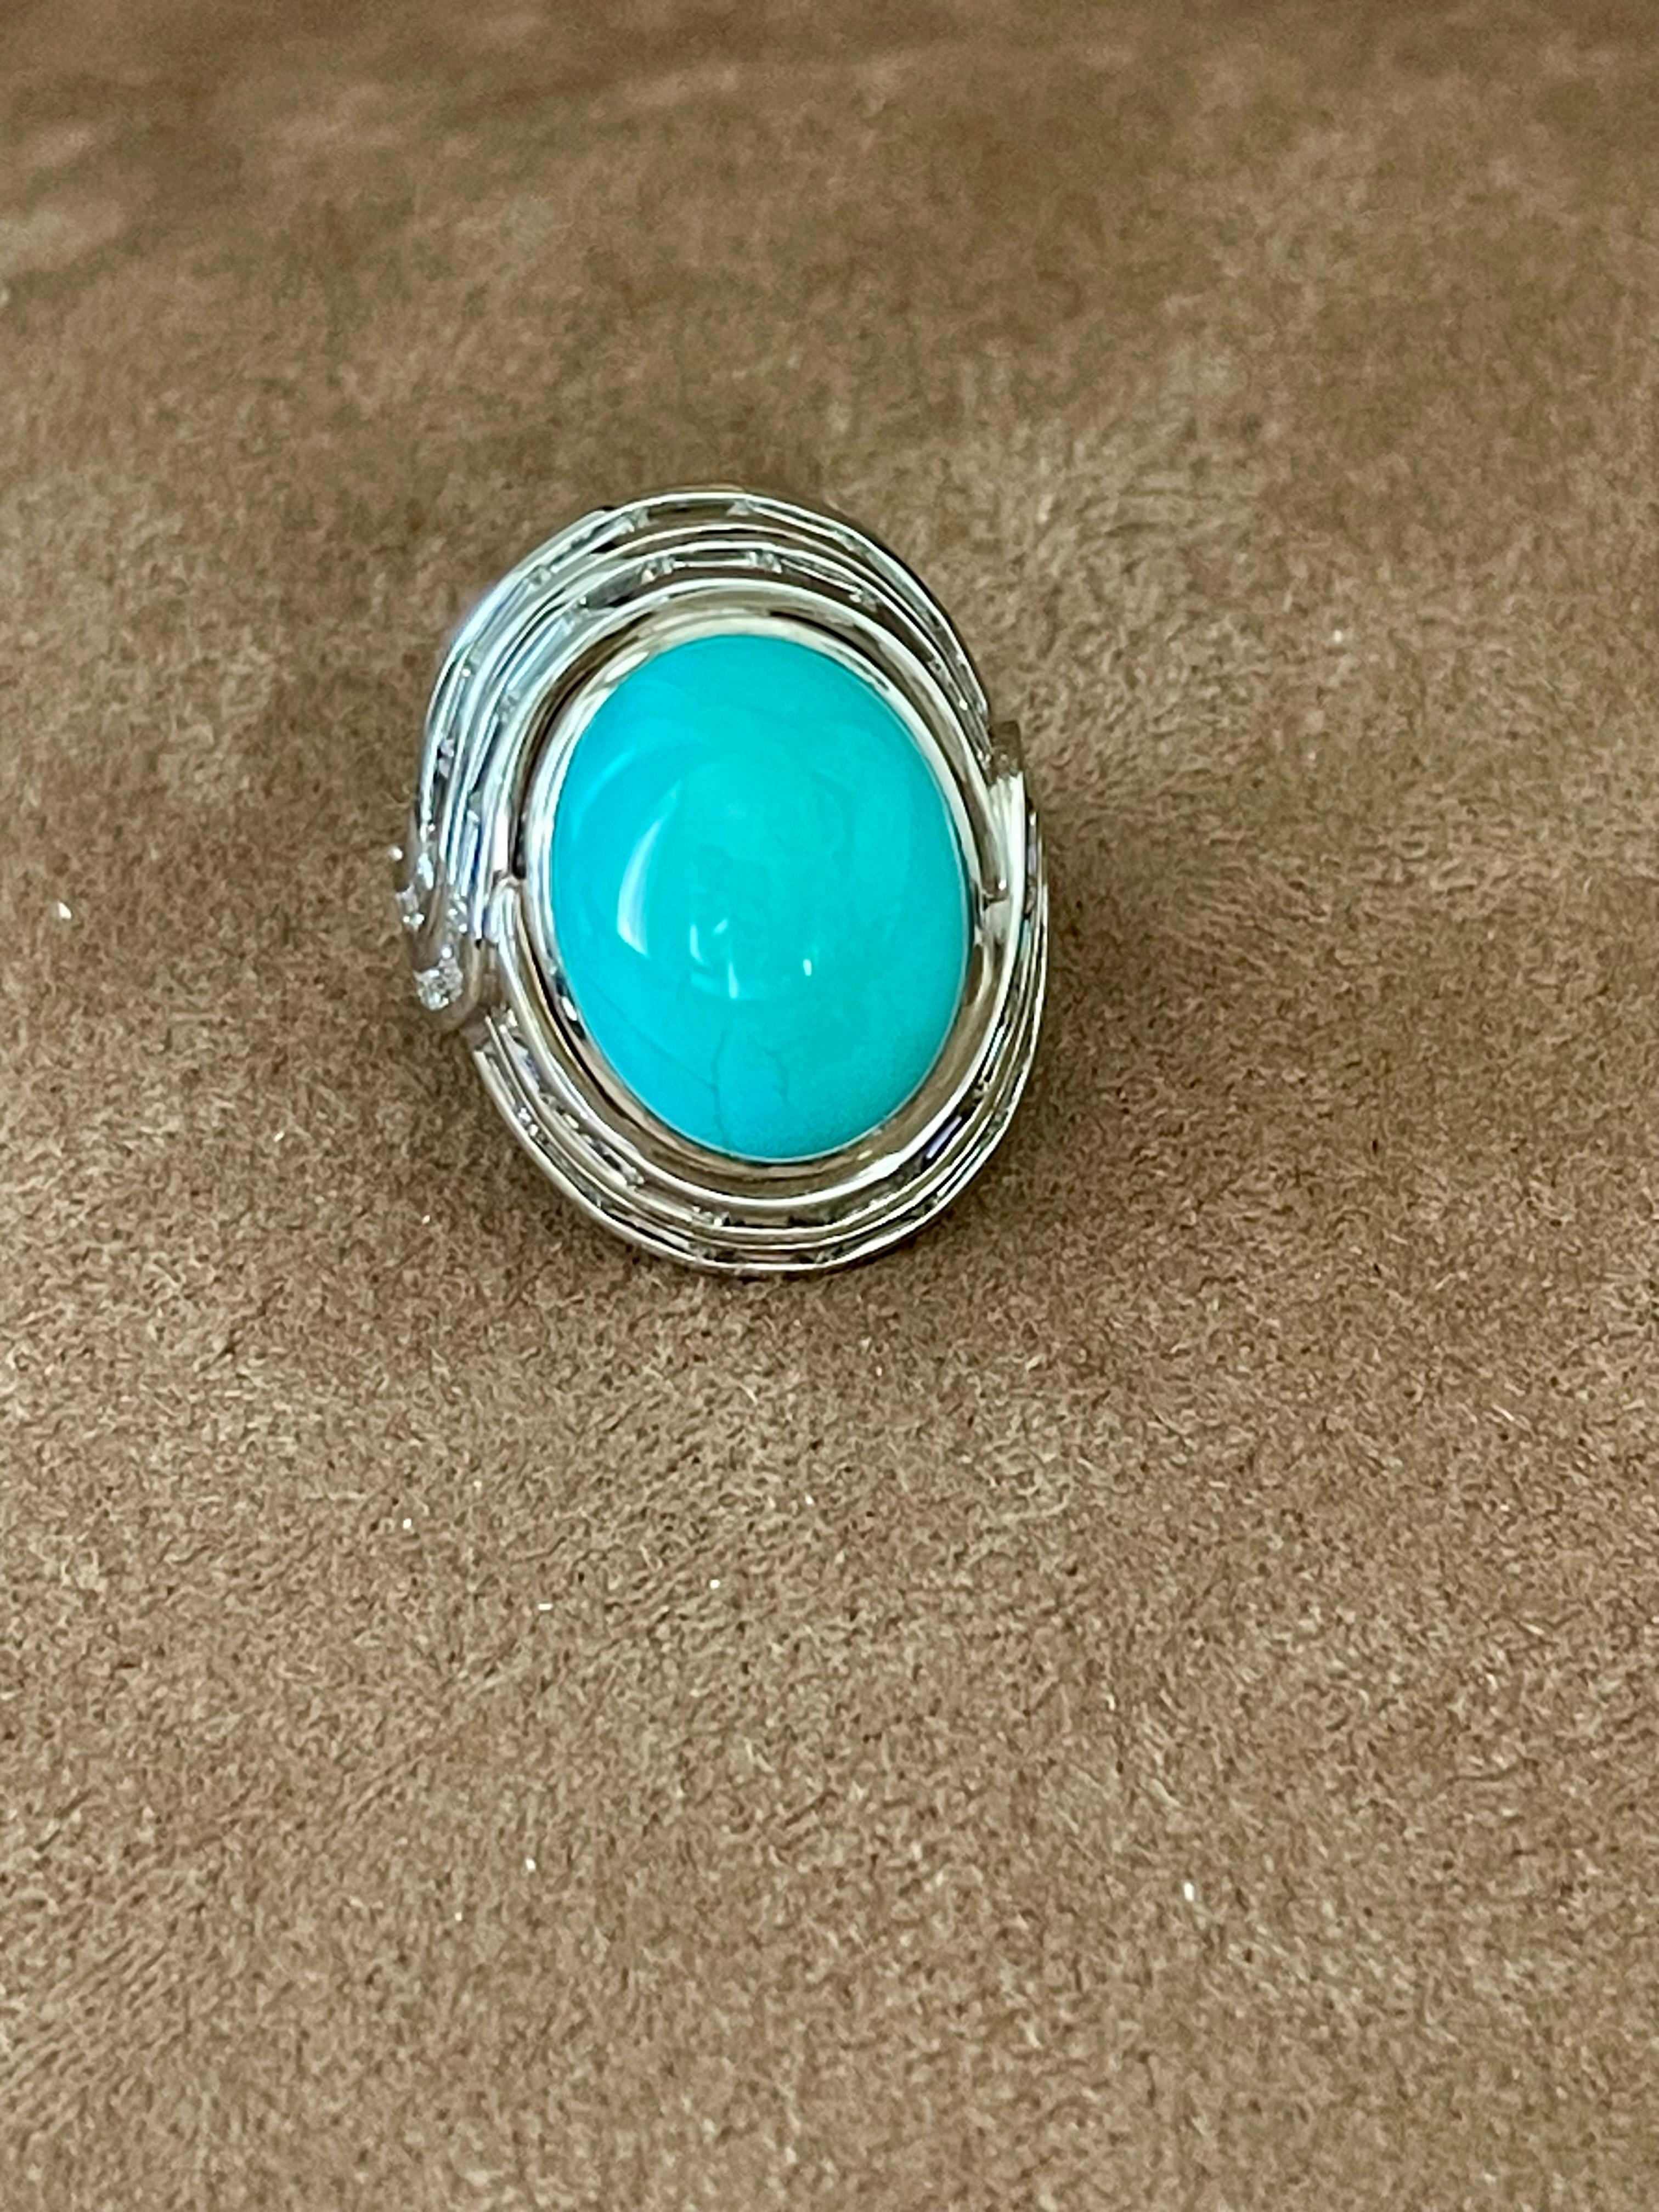 A timeless 18 K white Gold Ring by Paul Binder Zurich featuring a fine natural Turquoise Cabochon weighing 11.33 ct and 48 Baguette cut Diamonds weighing 2.24 ct, F/G color, if/vvs claritiy. 
Dimensions: 2.50 cm x 1.92 cm
The ring is currently size